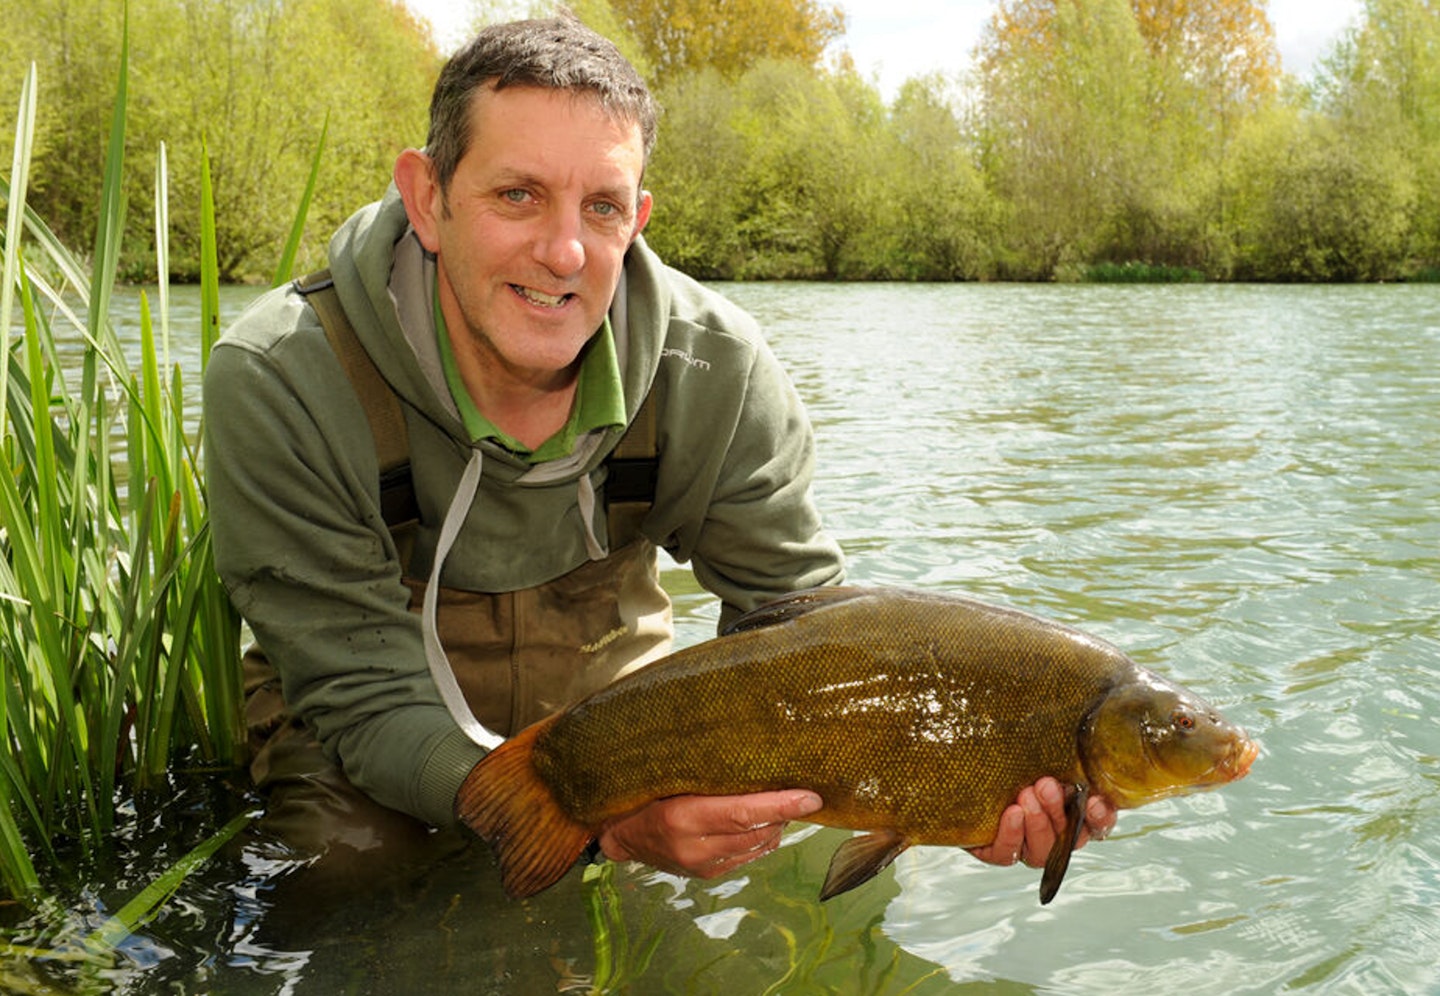 "The result probably has something to do with the average age of Angling Times readers being that little bit higher!"